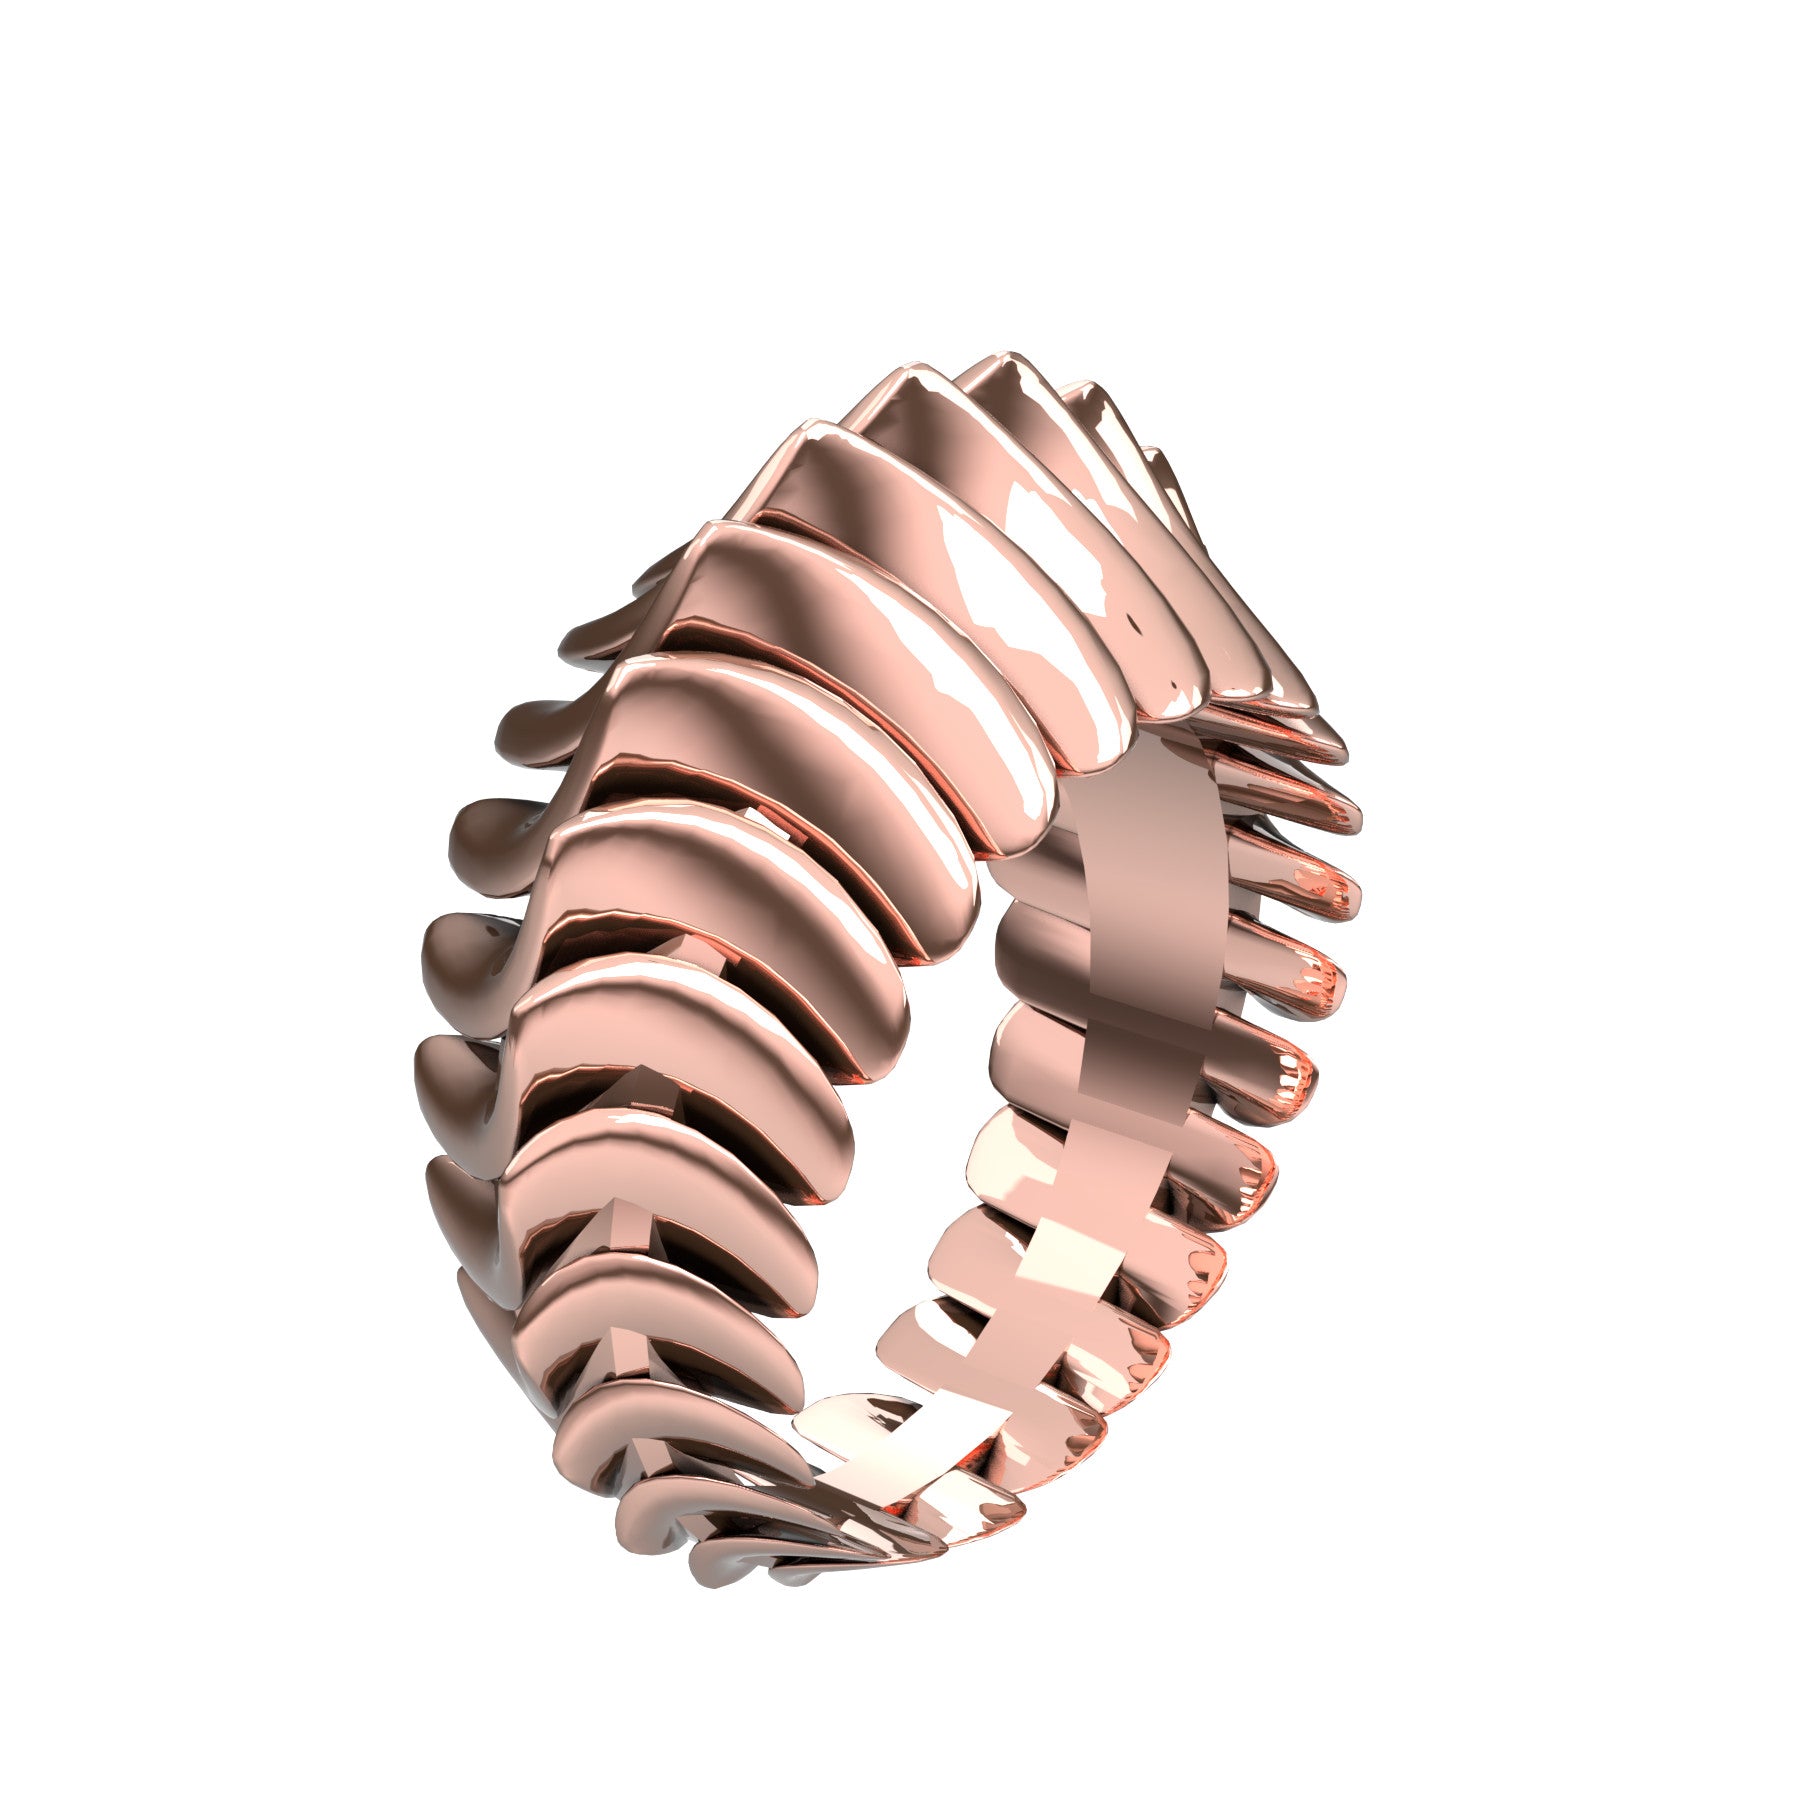 backbone ring, 18 K pink gold, weight about 9,2 g. (0.32 oz), width 12,0 mm max